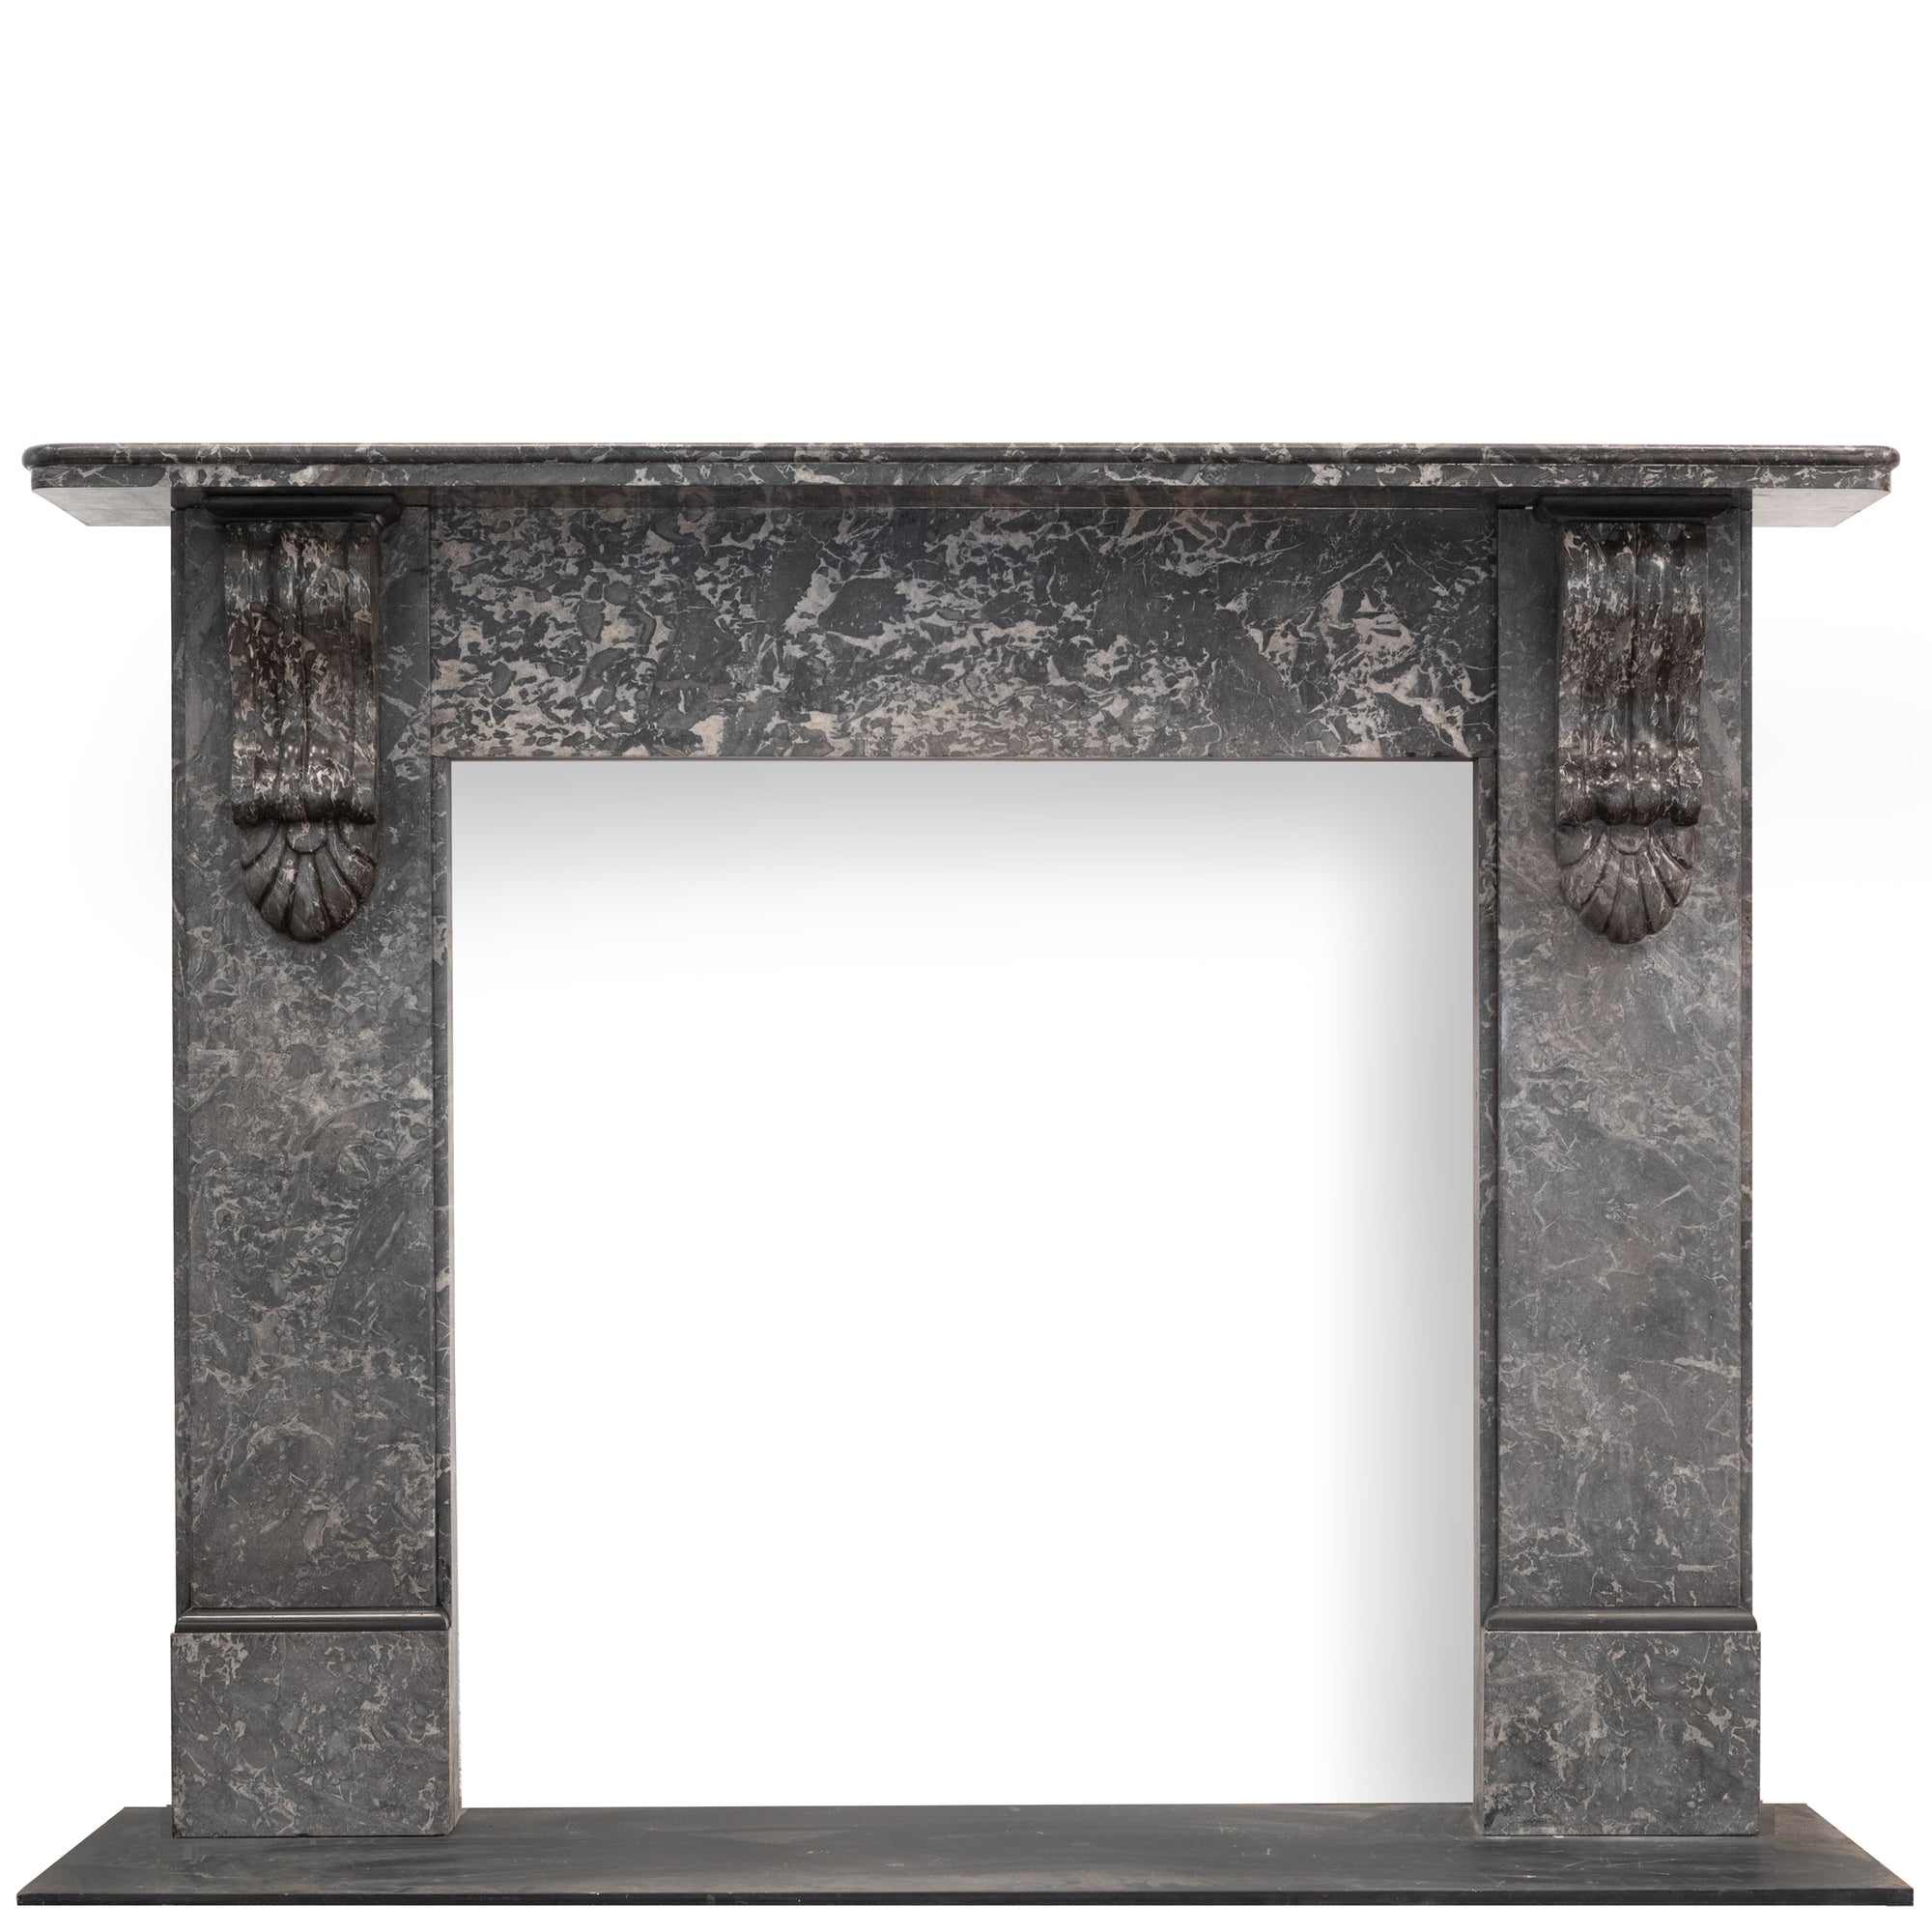 Antique Victorian St Anne's Marble Fireplace Surround with Corbels | The Architectural Forum